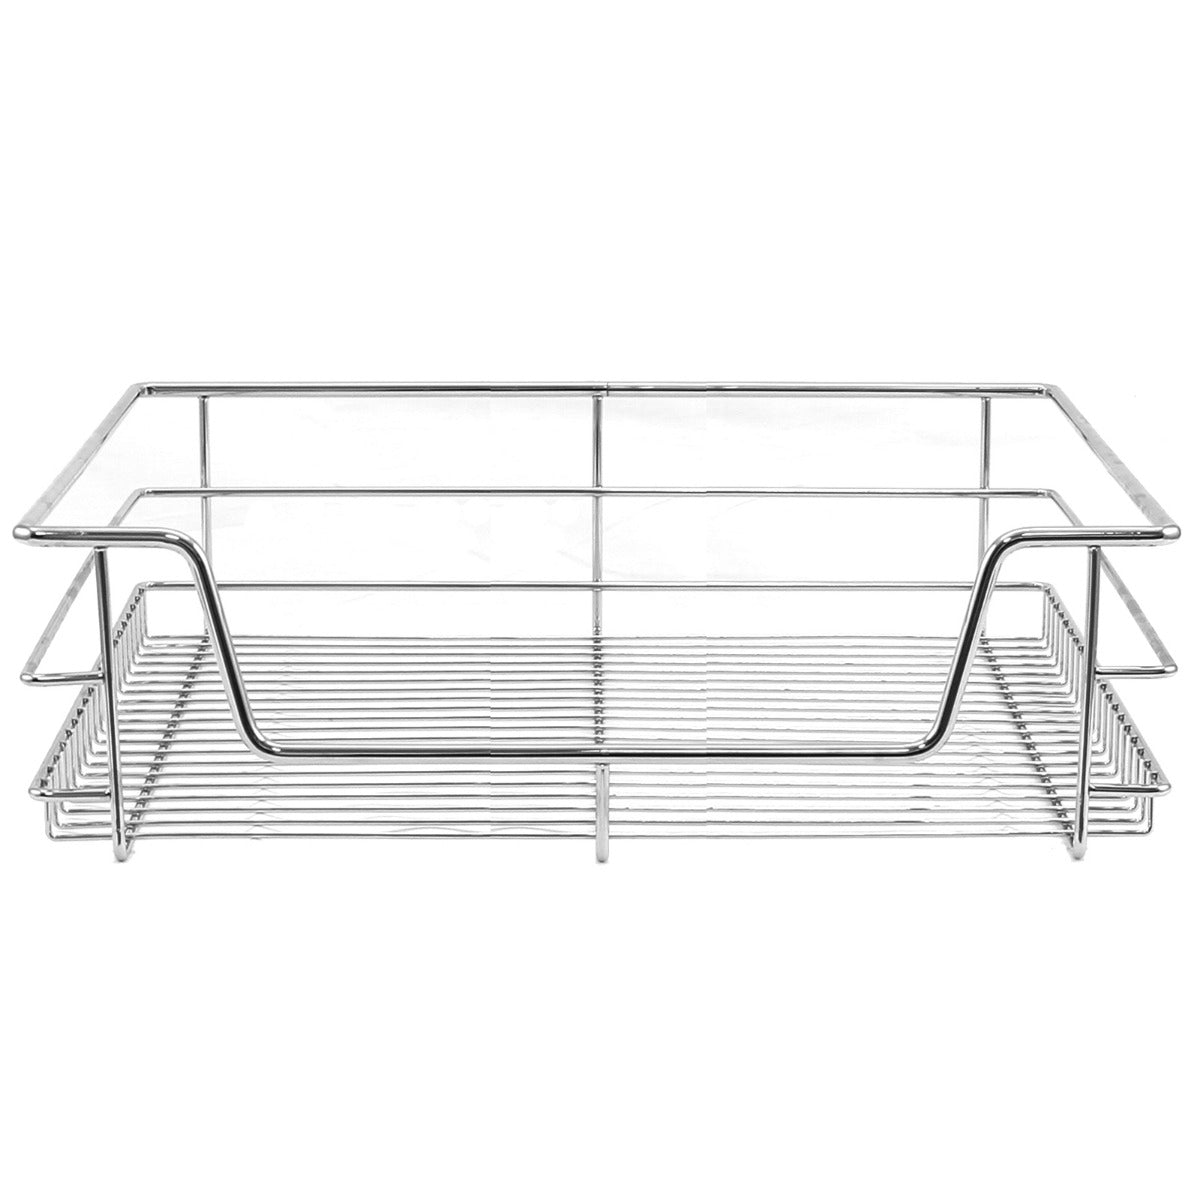 2 x KuKoo Kitchen Pull Out Storage Baskets – 600mm Wide Cabinet